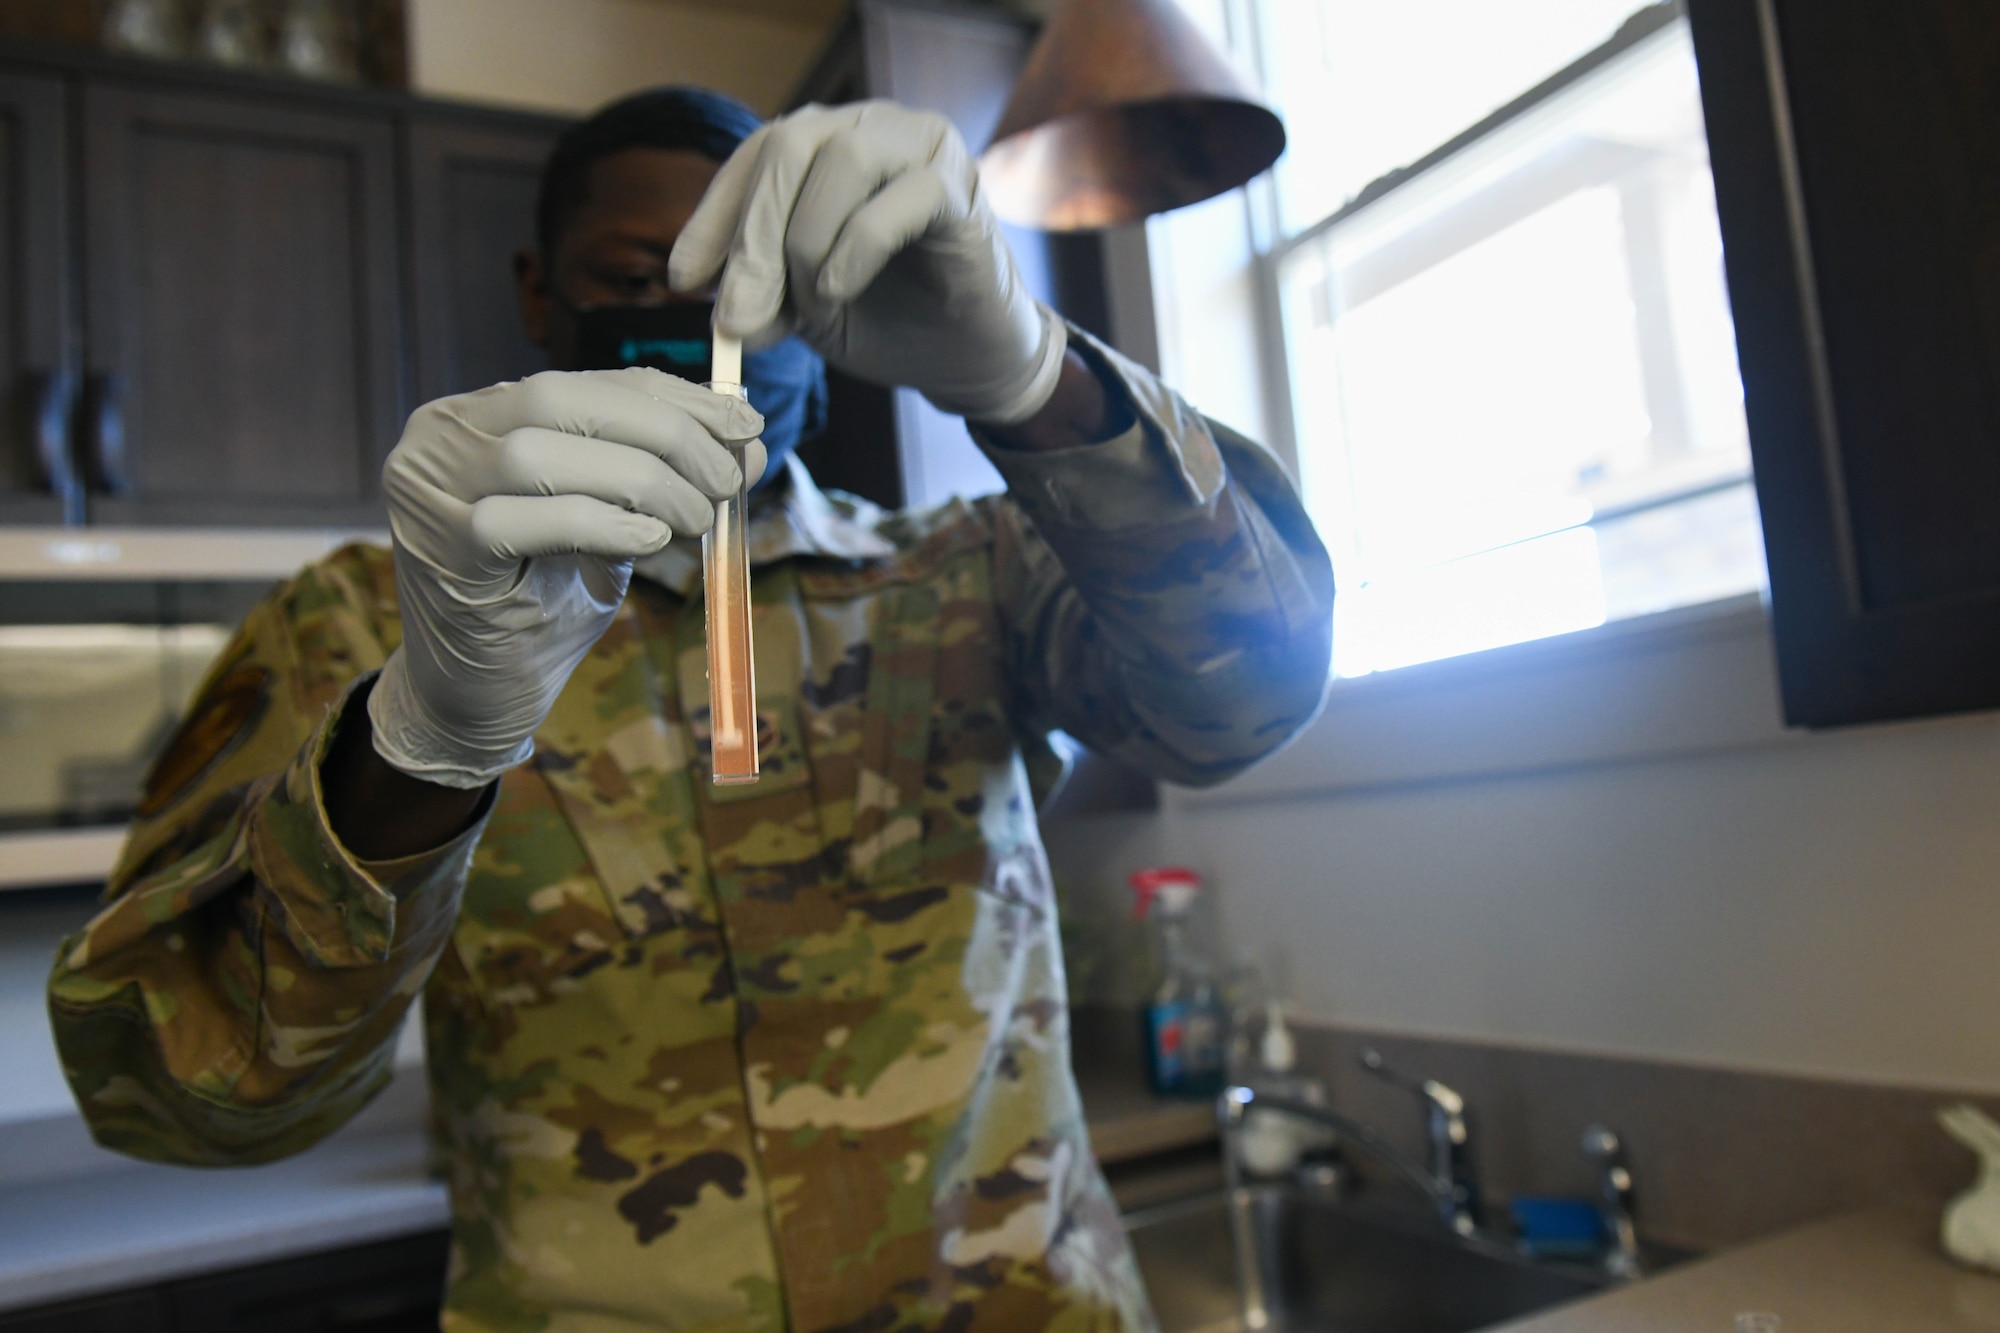 Airman 1st Class Ronald Smith, 22nd Operational Medical Readiness Squadron bioenvironmental engineering technician, performs water-quality tests Mar. 3, 2021, at McConnell Air Force Base Kansas. Bioenvironmental Airmen are responsible for minimizing environmental health hazards in the workplace and ensure safe working conditions. (U.S. Air Force photo by Senior Airman Nilsa Garcia)